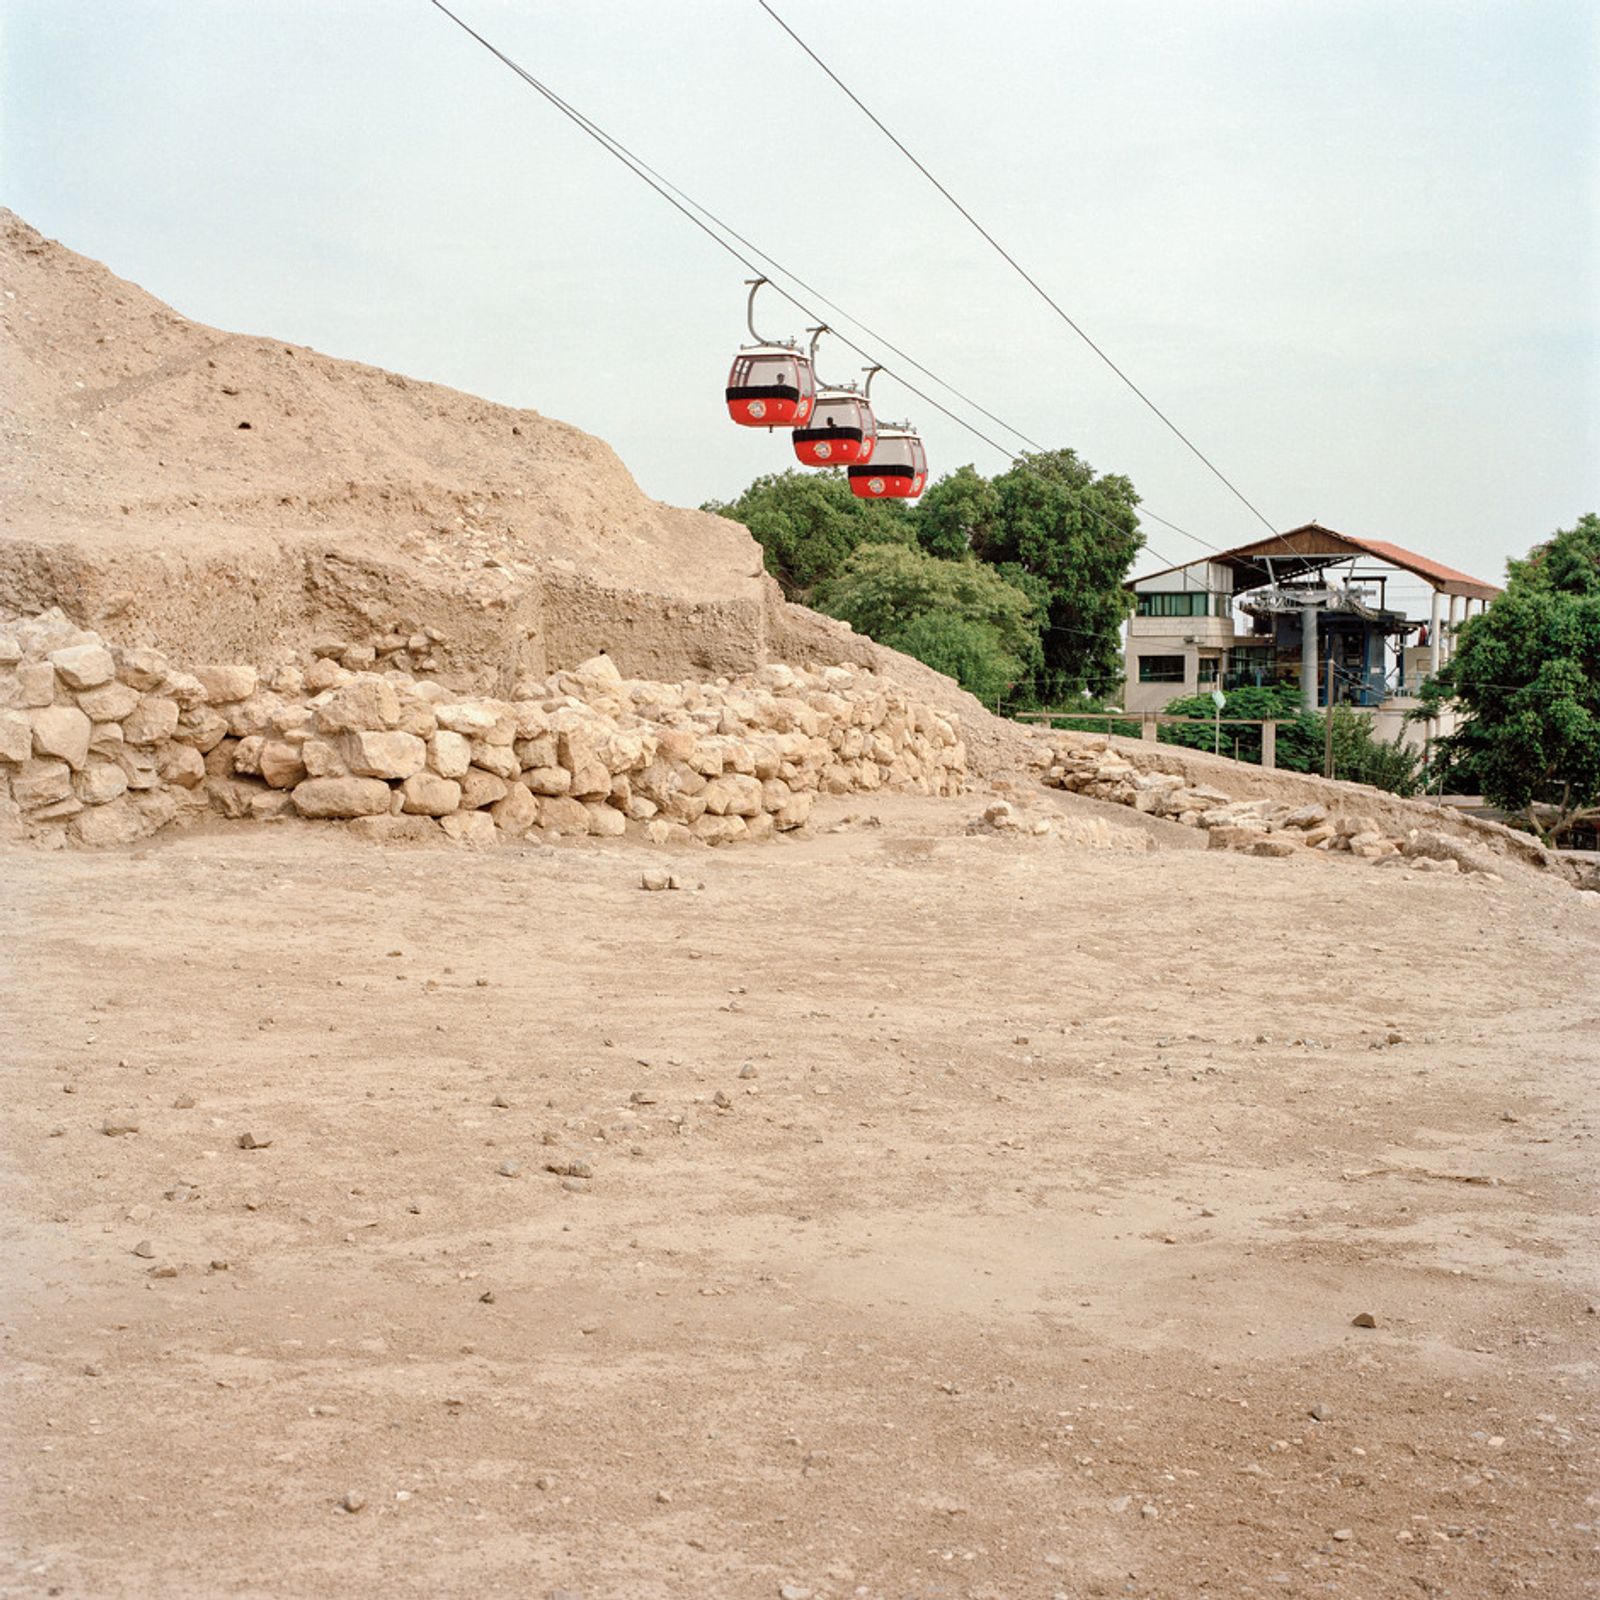 © Federico Busonero - Image from the The Land That Remains - Photographs from Palestine photography project